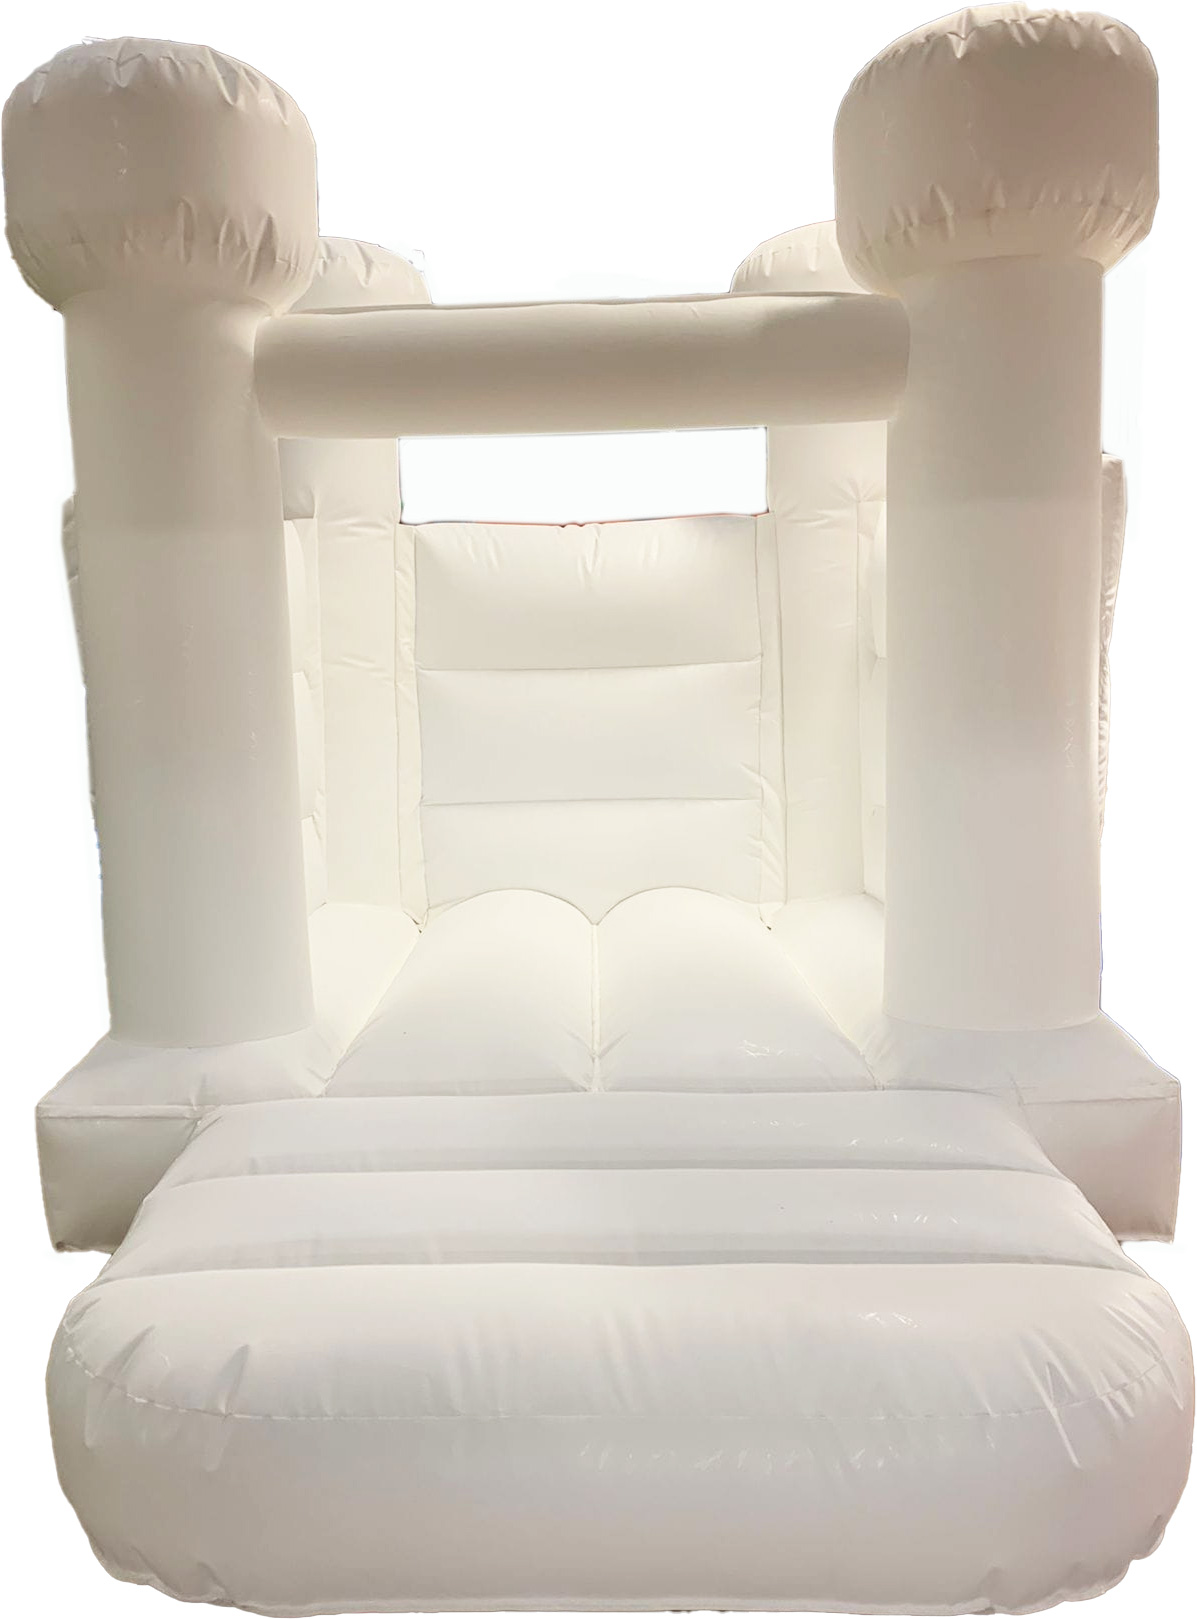 Bouncy Castle Sales - BC717 - Bouncy Inflatable for sale